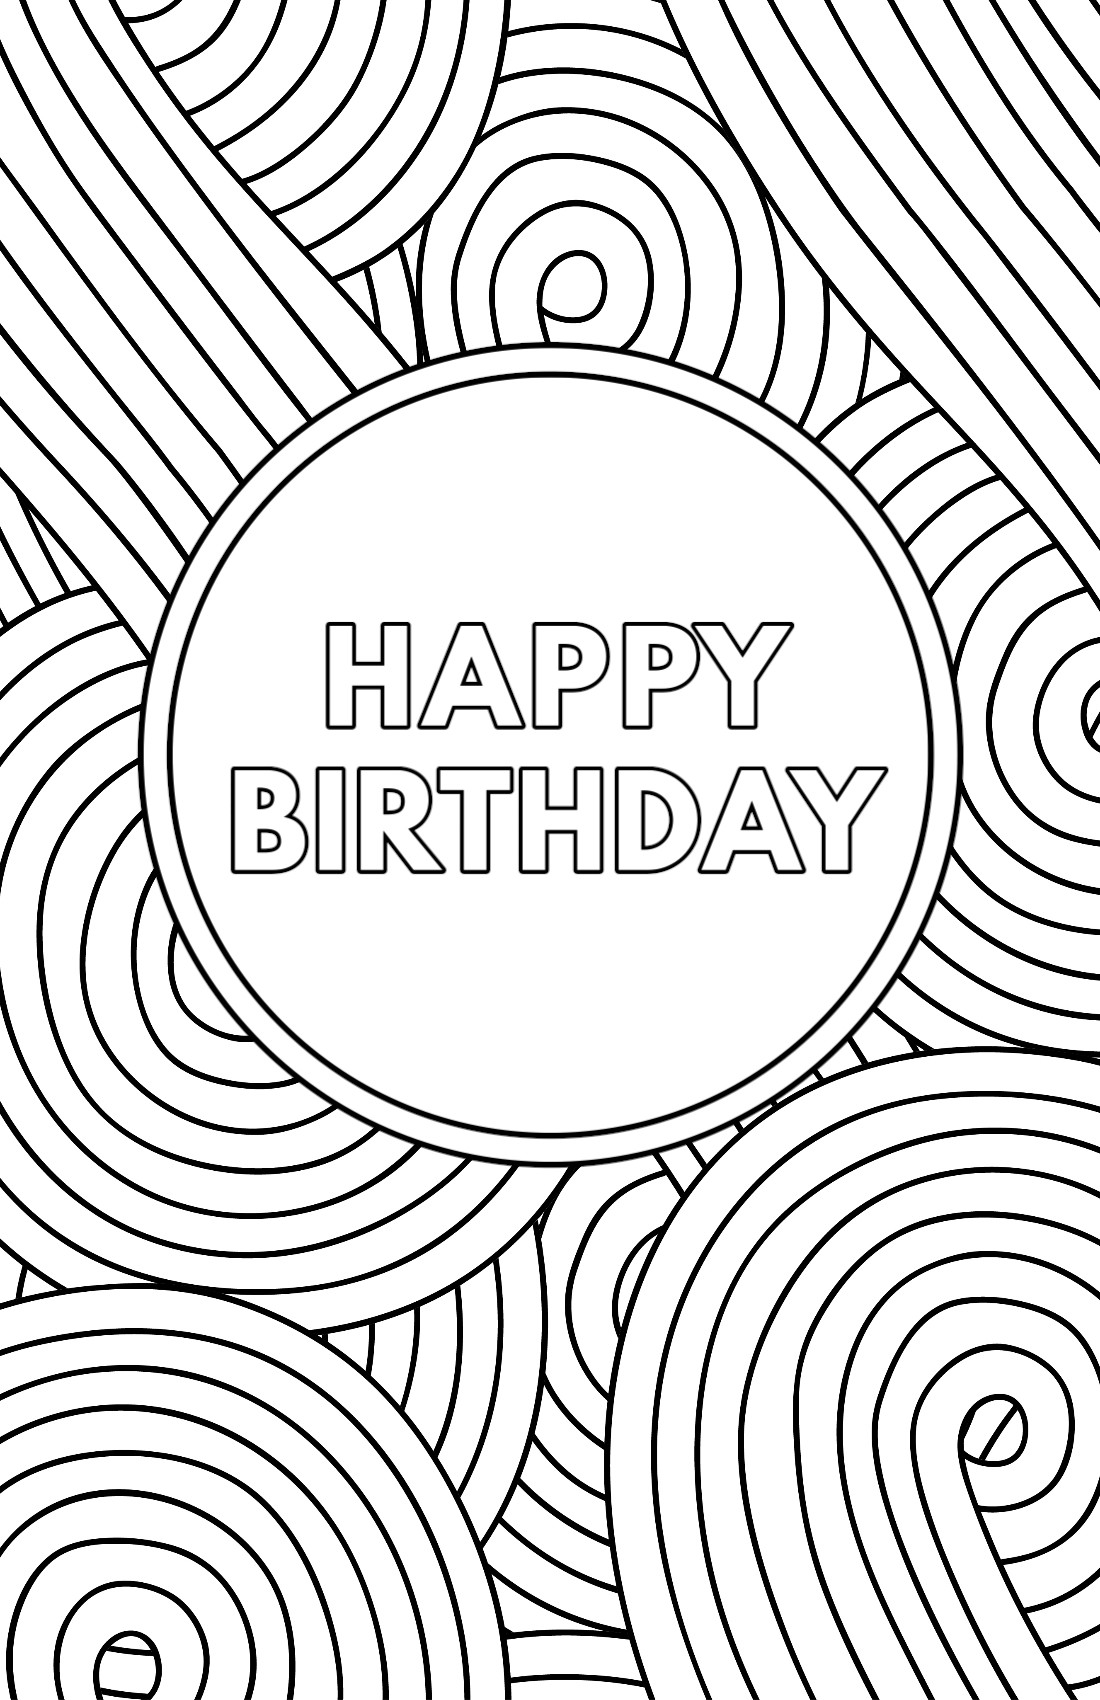 Printable Coloring Birthday Cards
 Free Printable Birthday Cards Paper Trail Design